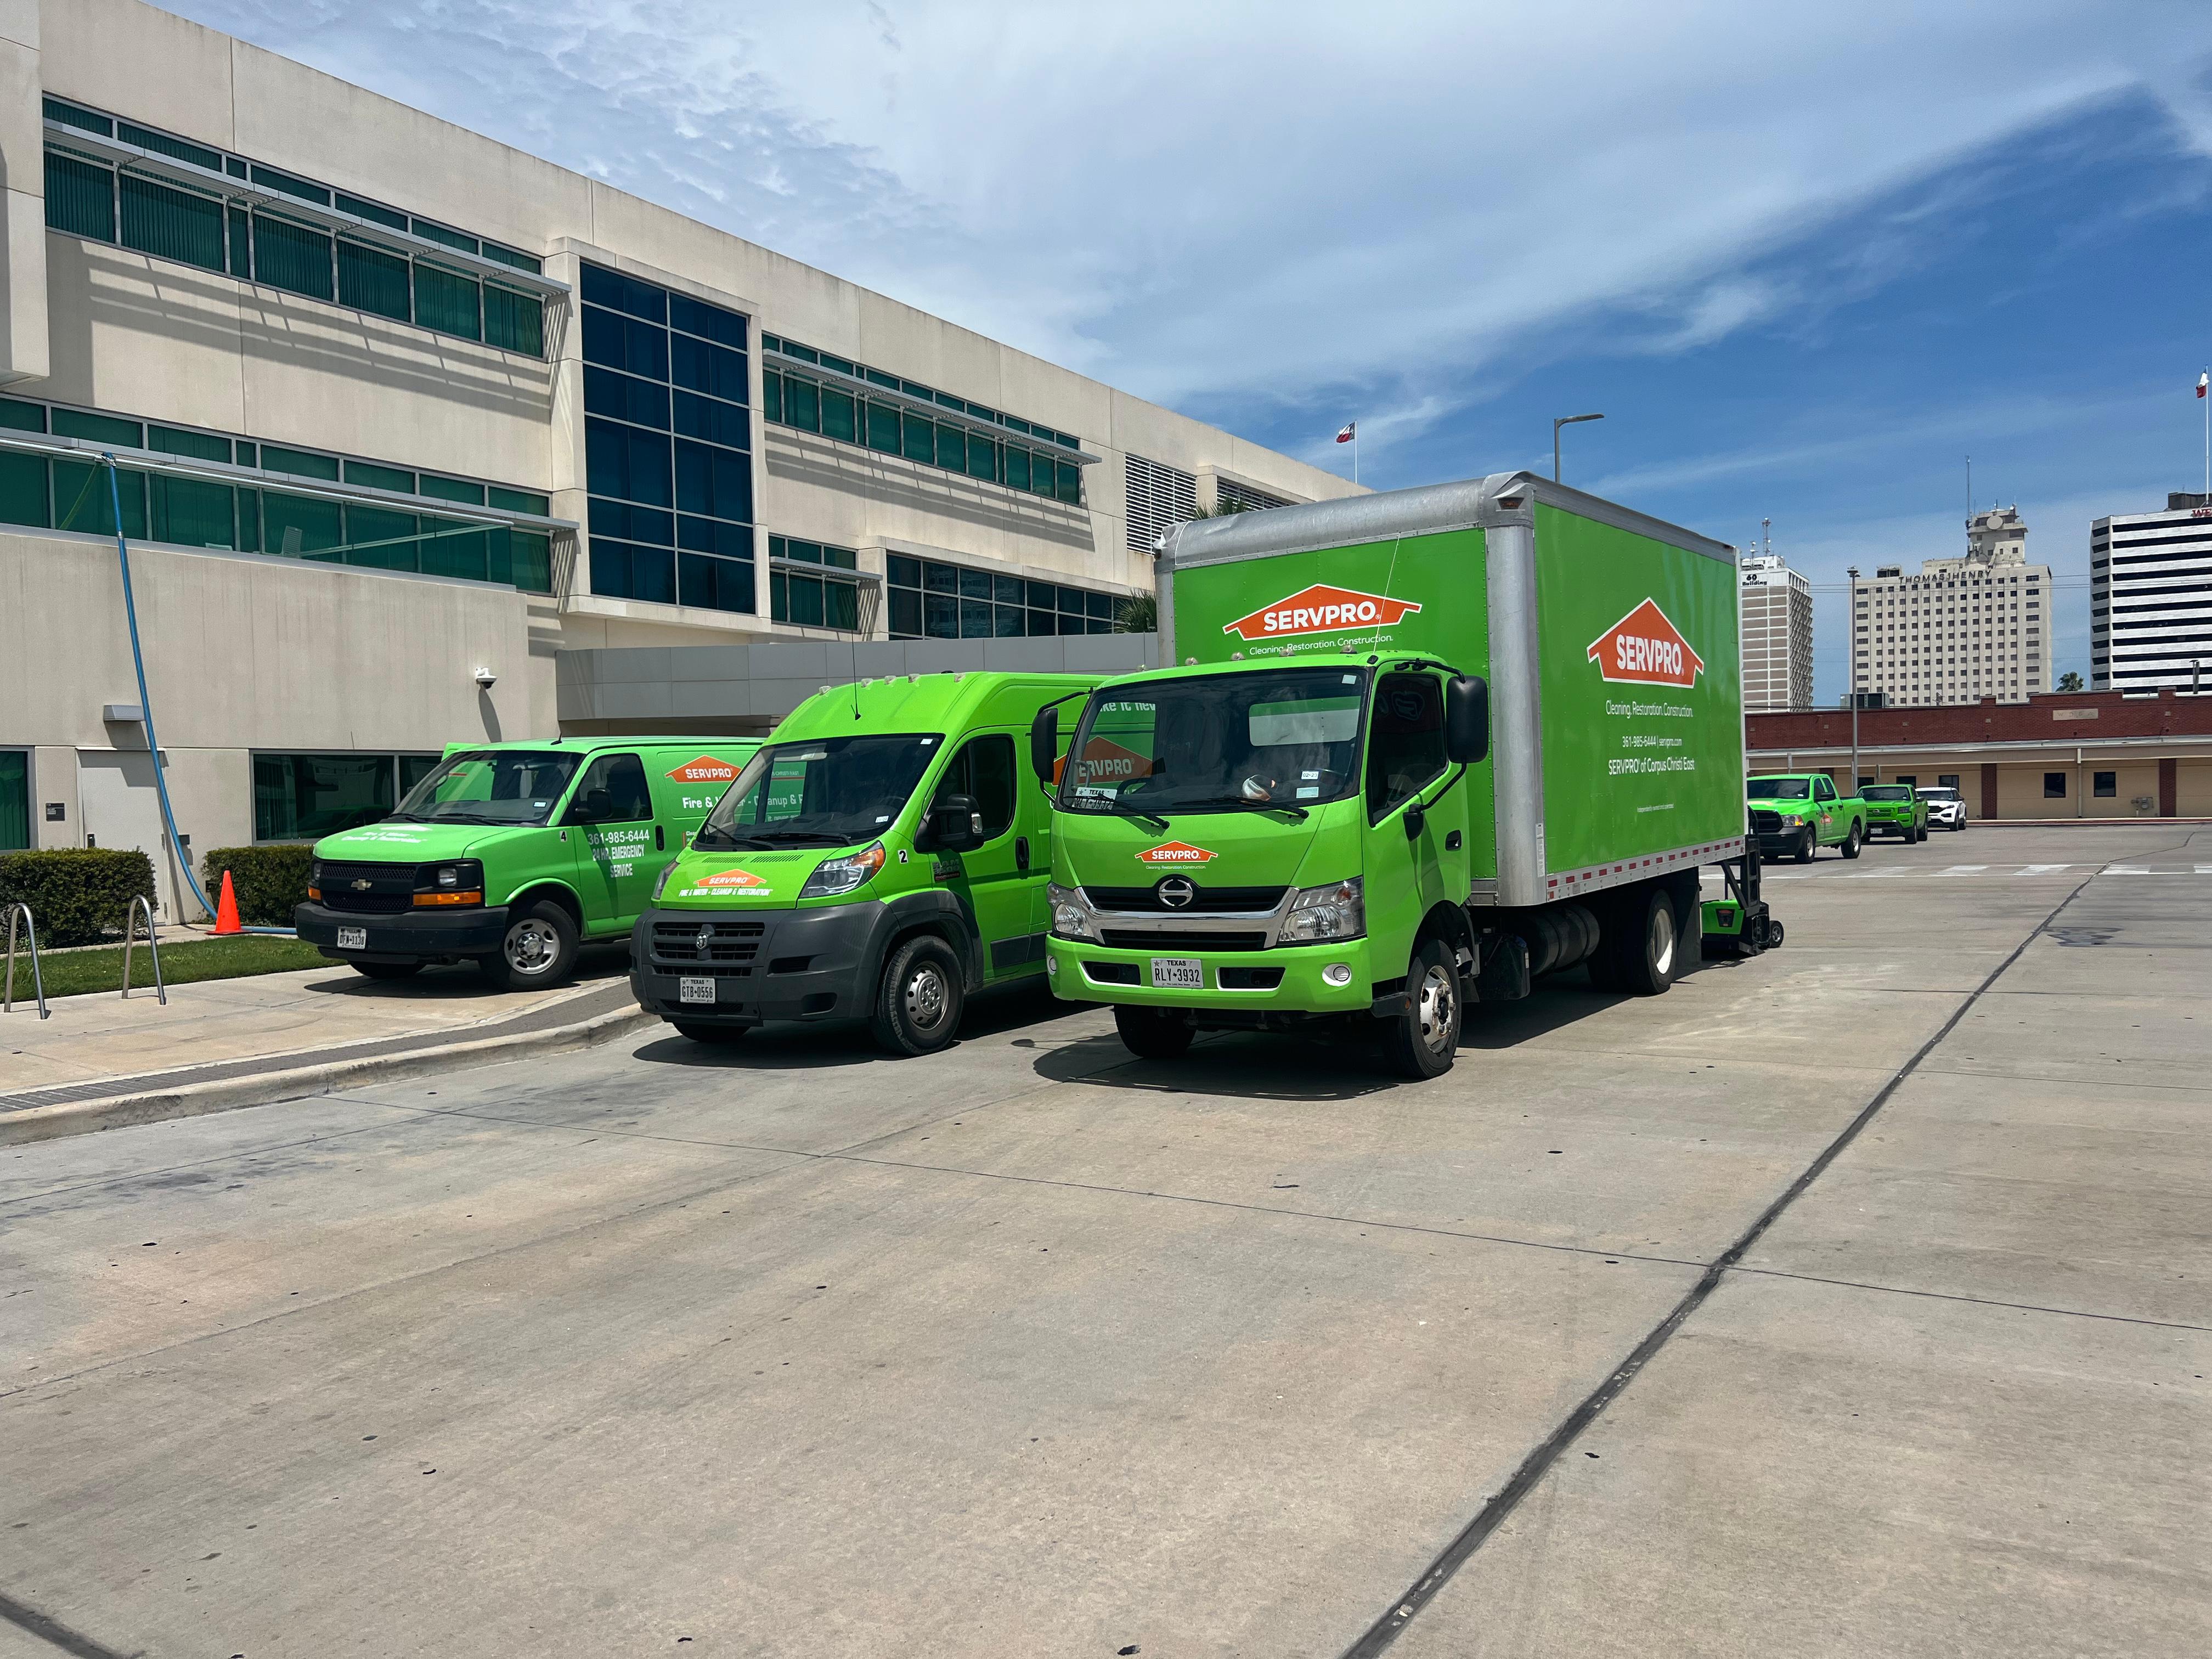 SERVPRO trucks lined up and ready to get to work.